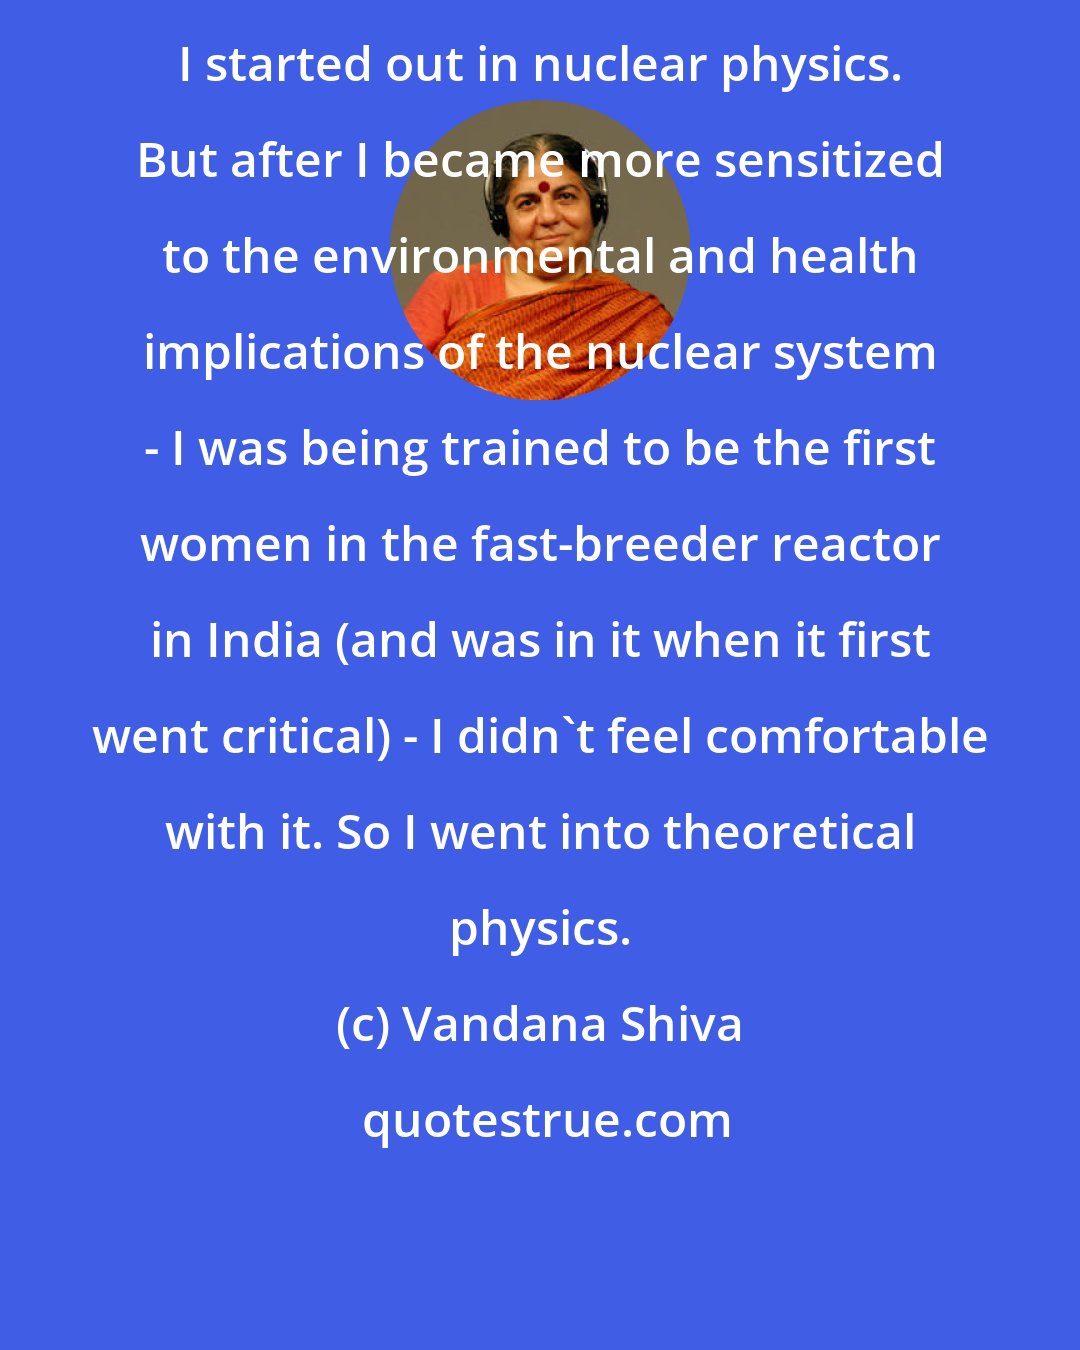 Vandana Shiva: I started out in nuclear physics. But after I became more sensitized to the environmental and health implications of the nuclear system - I was being trained to be the first women in the fast-breeder reactor in India (and was in it when it first went critical) - I didn't feel comfortable with it. So I went into theoretical physics.